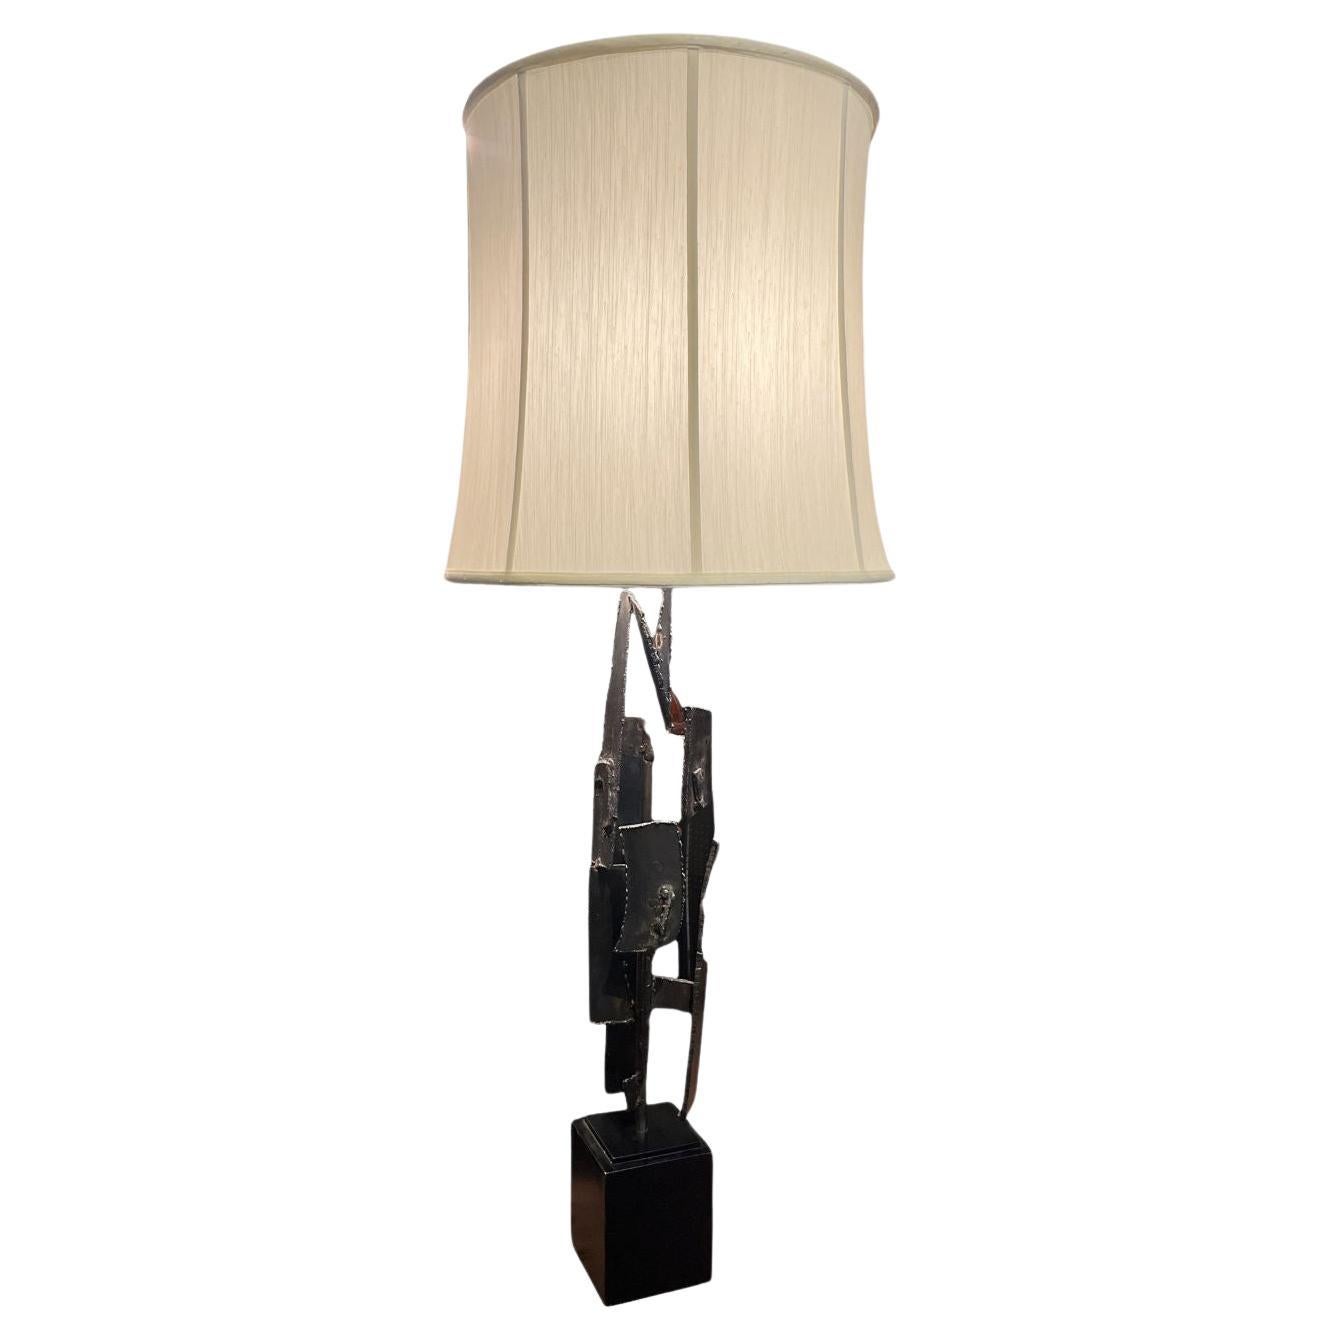 Mid-Century Modern Brutalist Lamp by Richard Barr for Laurel Lamp Company C.1970 For Sale